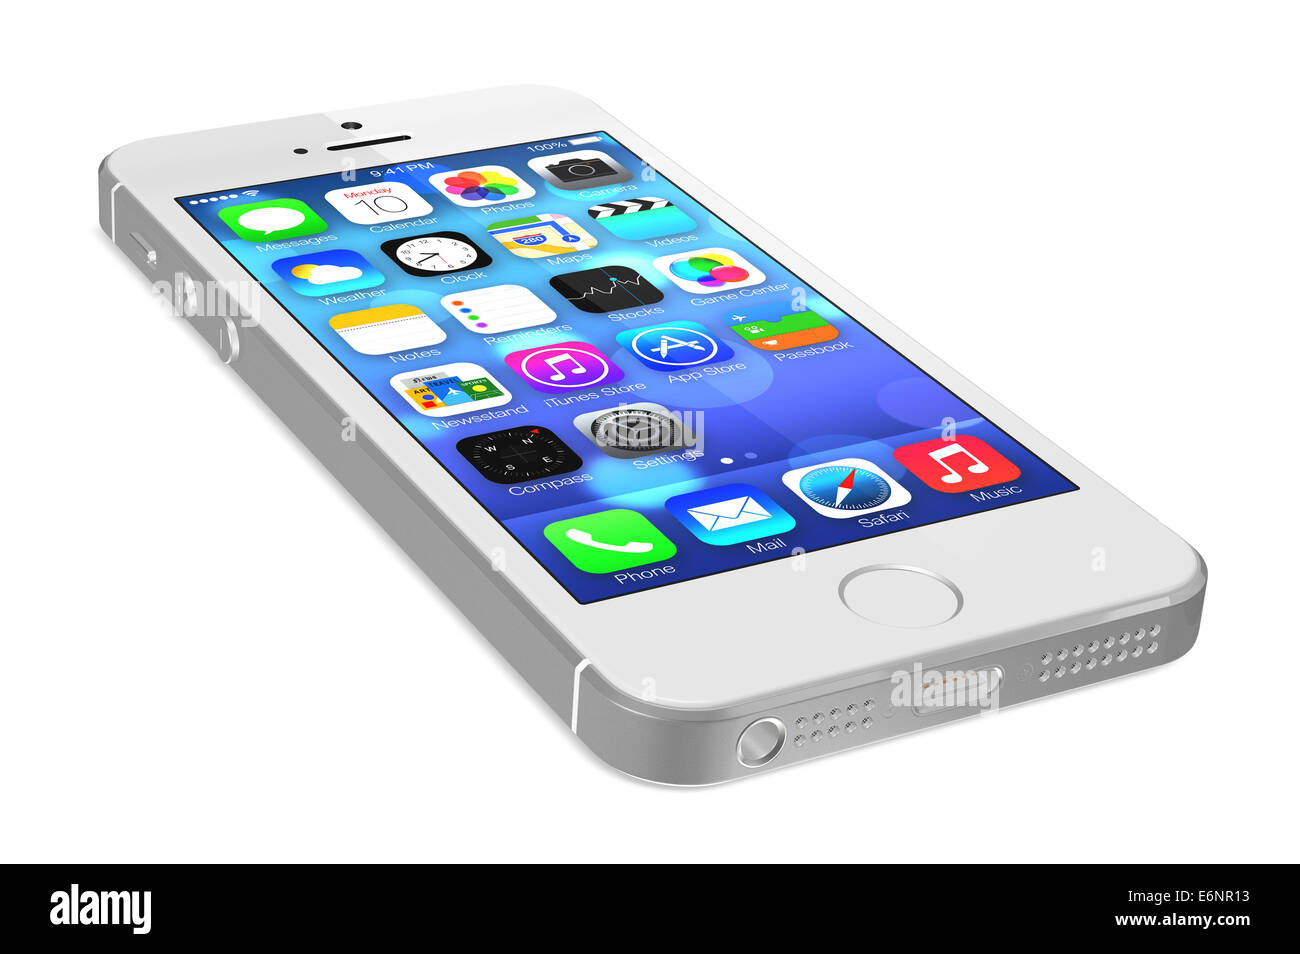 Silver iPhone 5s showing the home screen with iOS7. Stock Photo